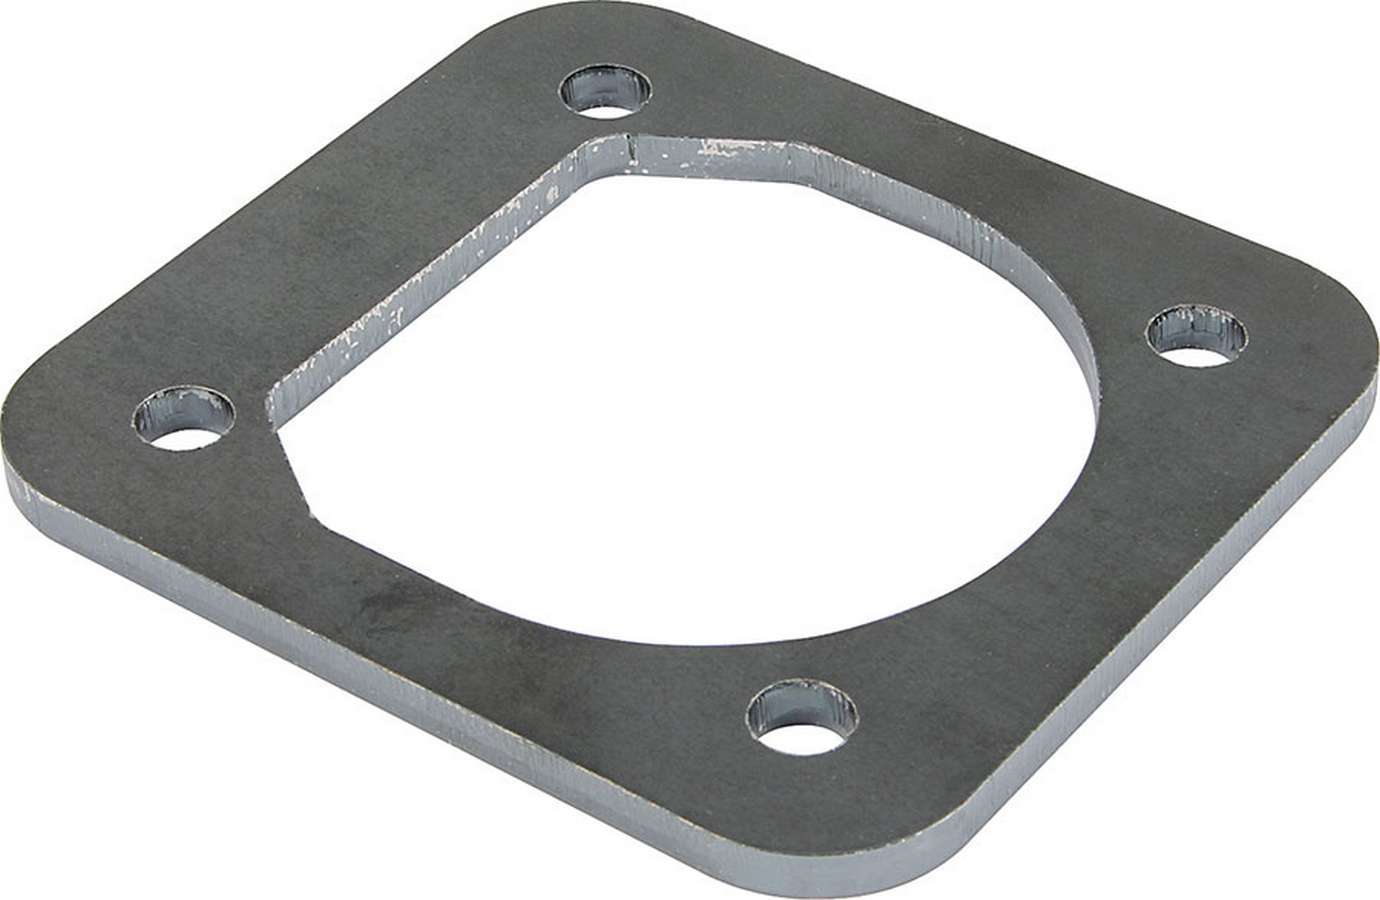 Allstar Performance 60074 D-Ring Backing Plate, 1/4 in Thick, Steel, Natural, Trailer D-Rings, Each